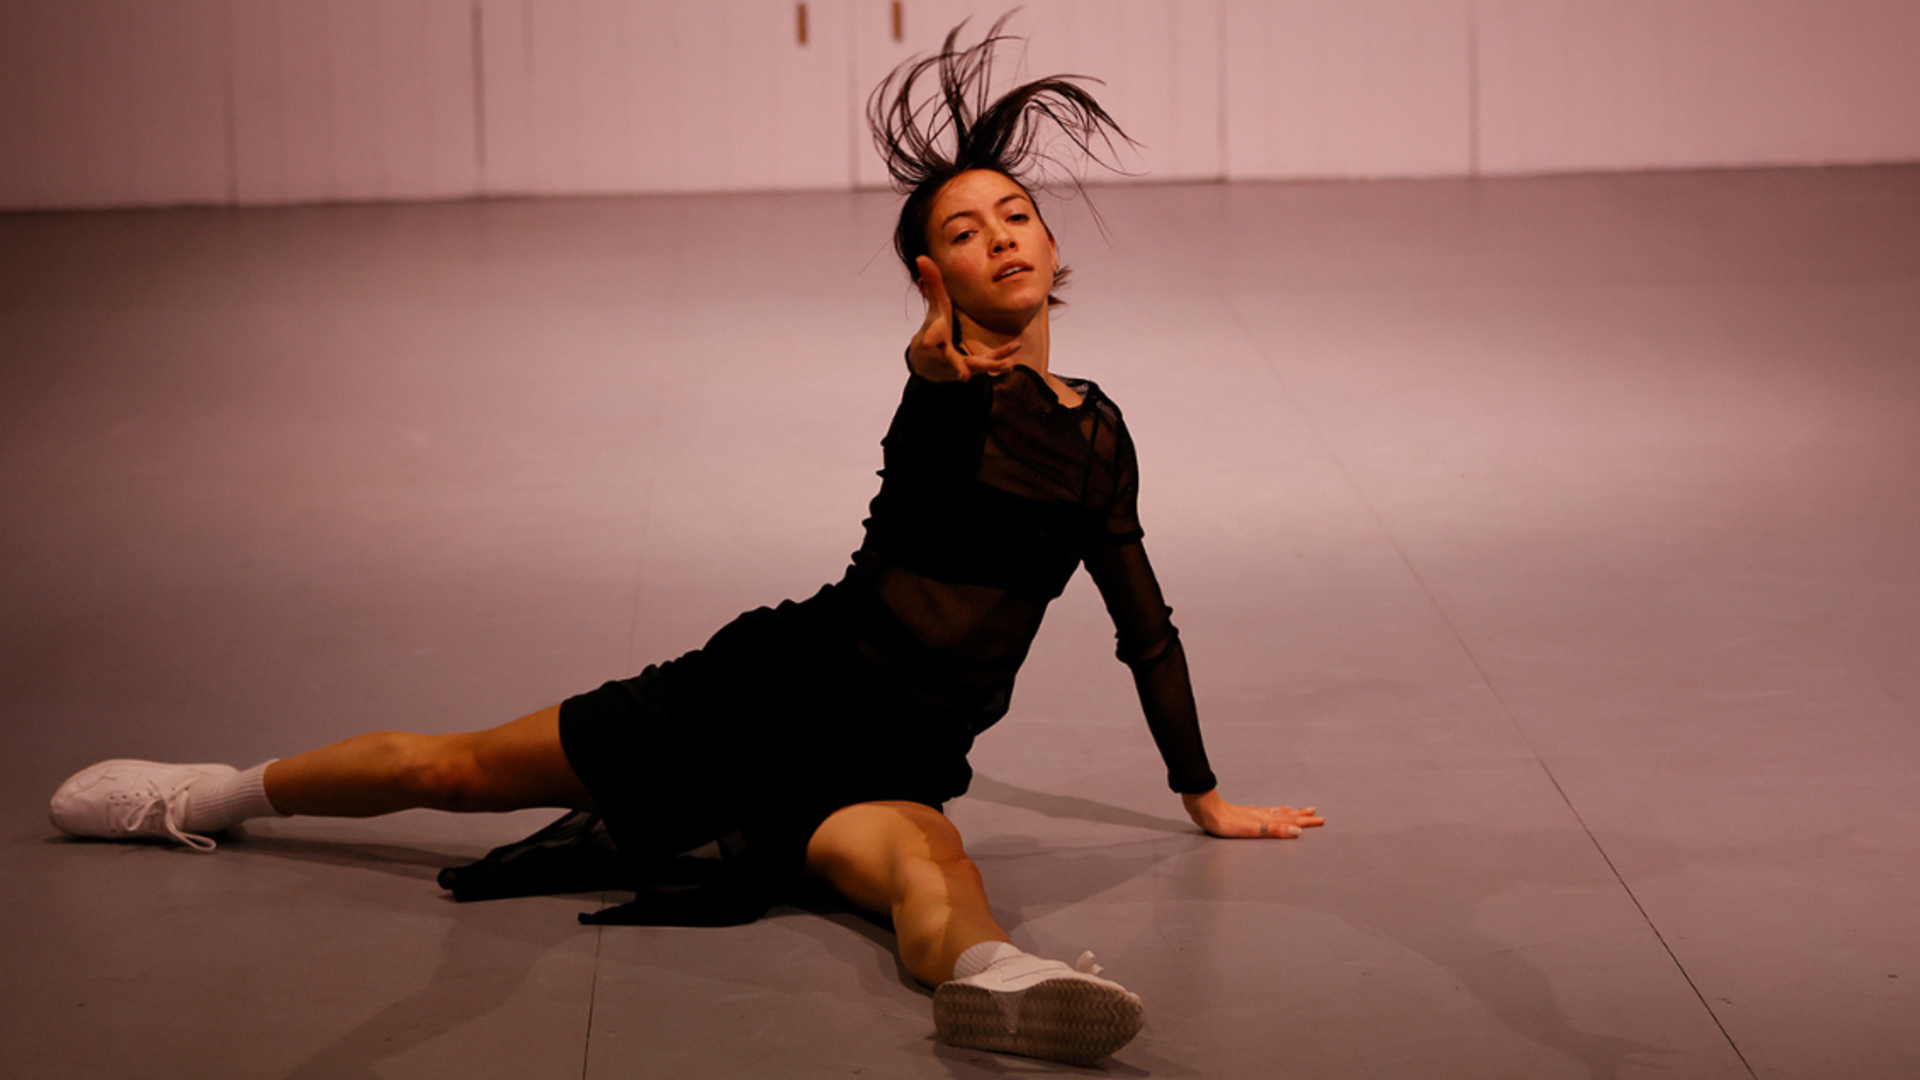 Dancer Tra Mi Dinh performing in Out of Bounds 2022 at Temperance Hall. She is wearing a black shift dress and white sneakers, moving on the floor with an arm outstretched o the audience.